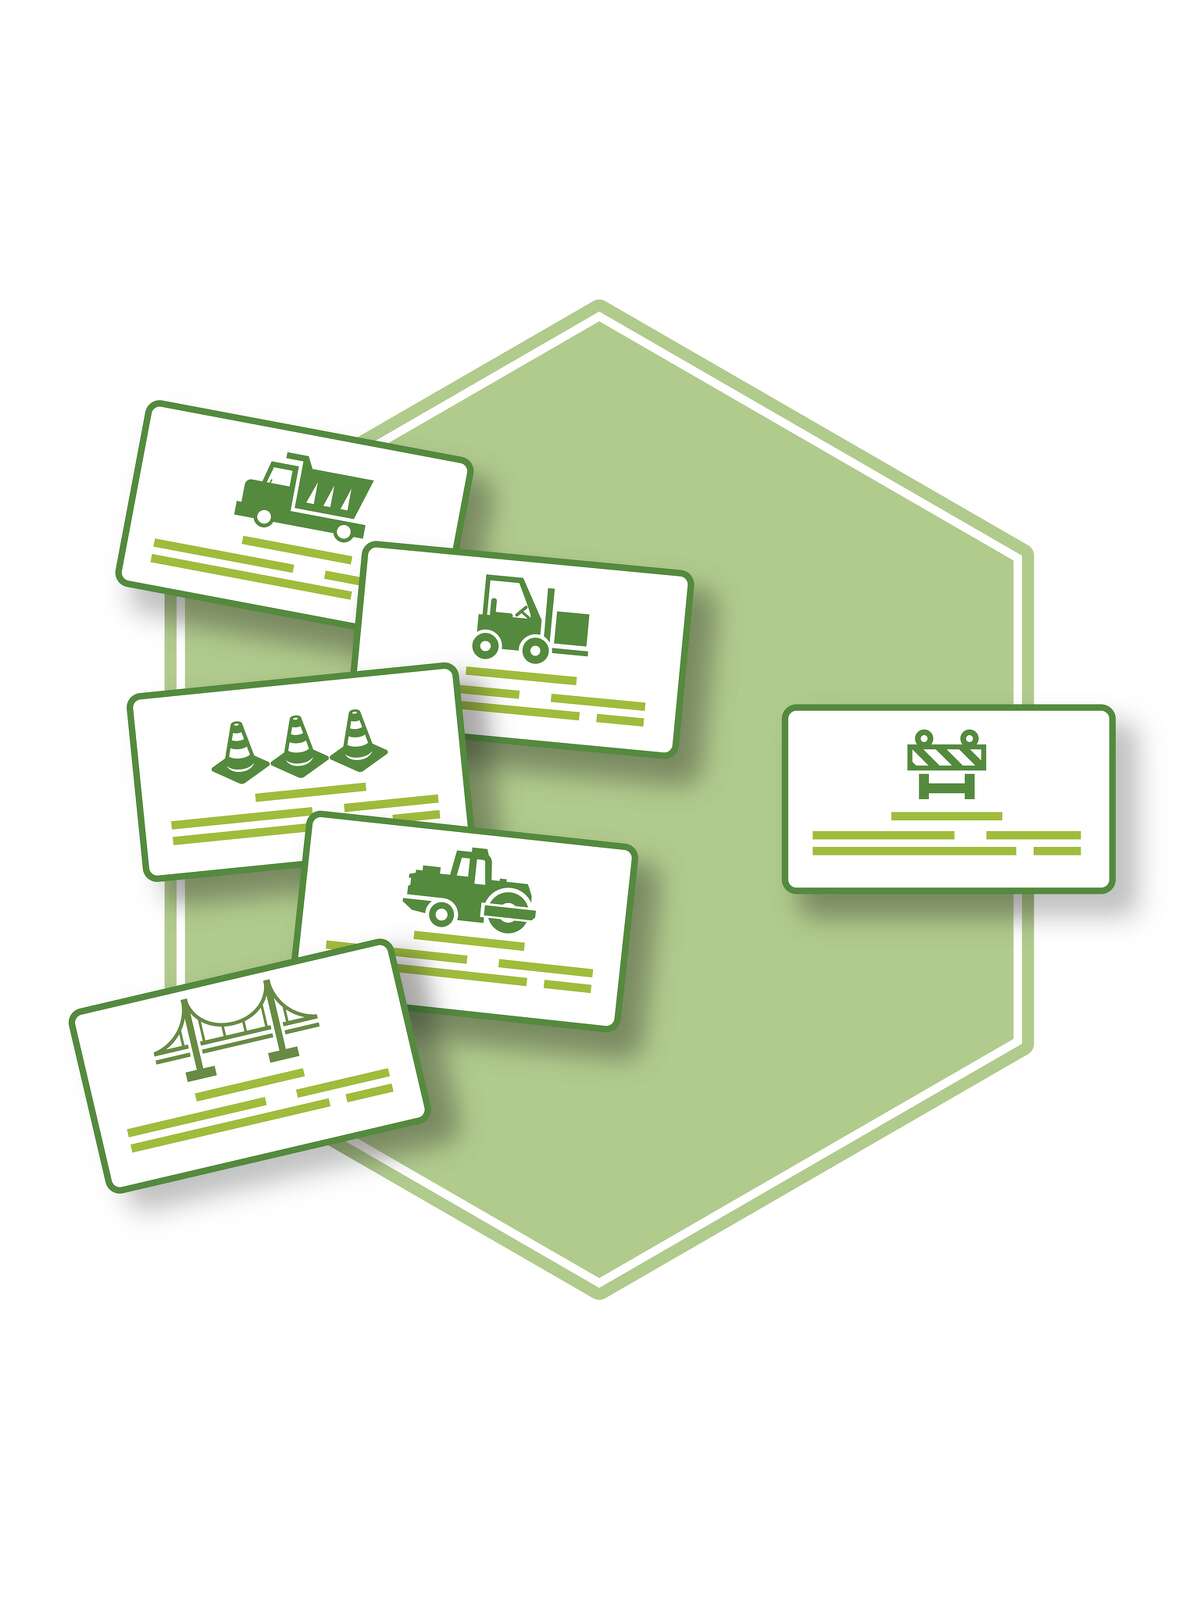 Illustration of third process, business cards with infrastrcuture tools on them